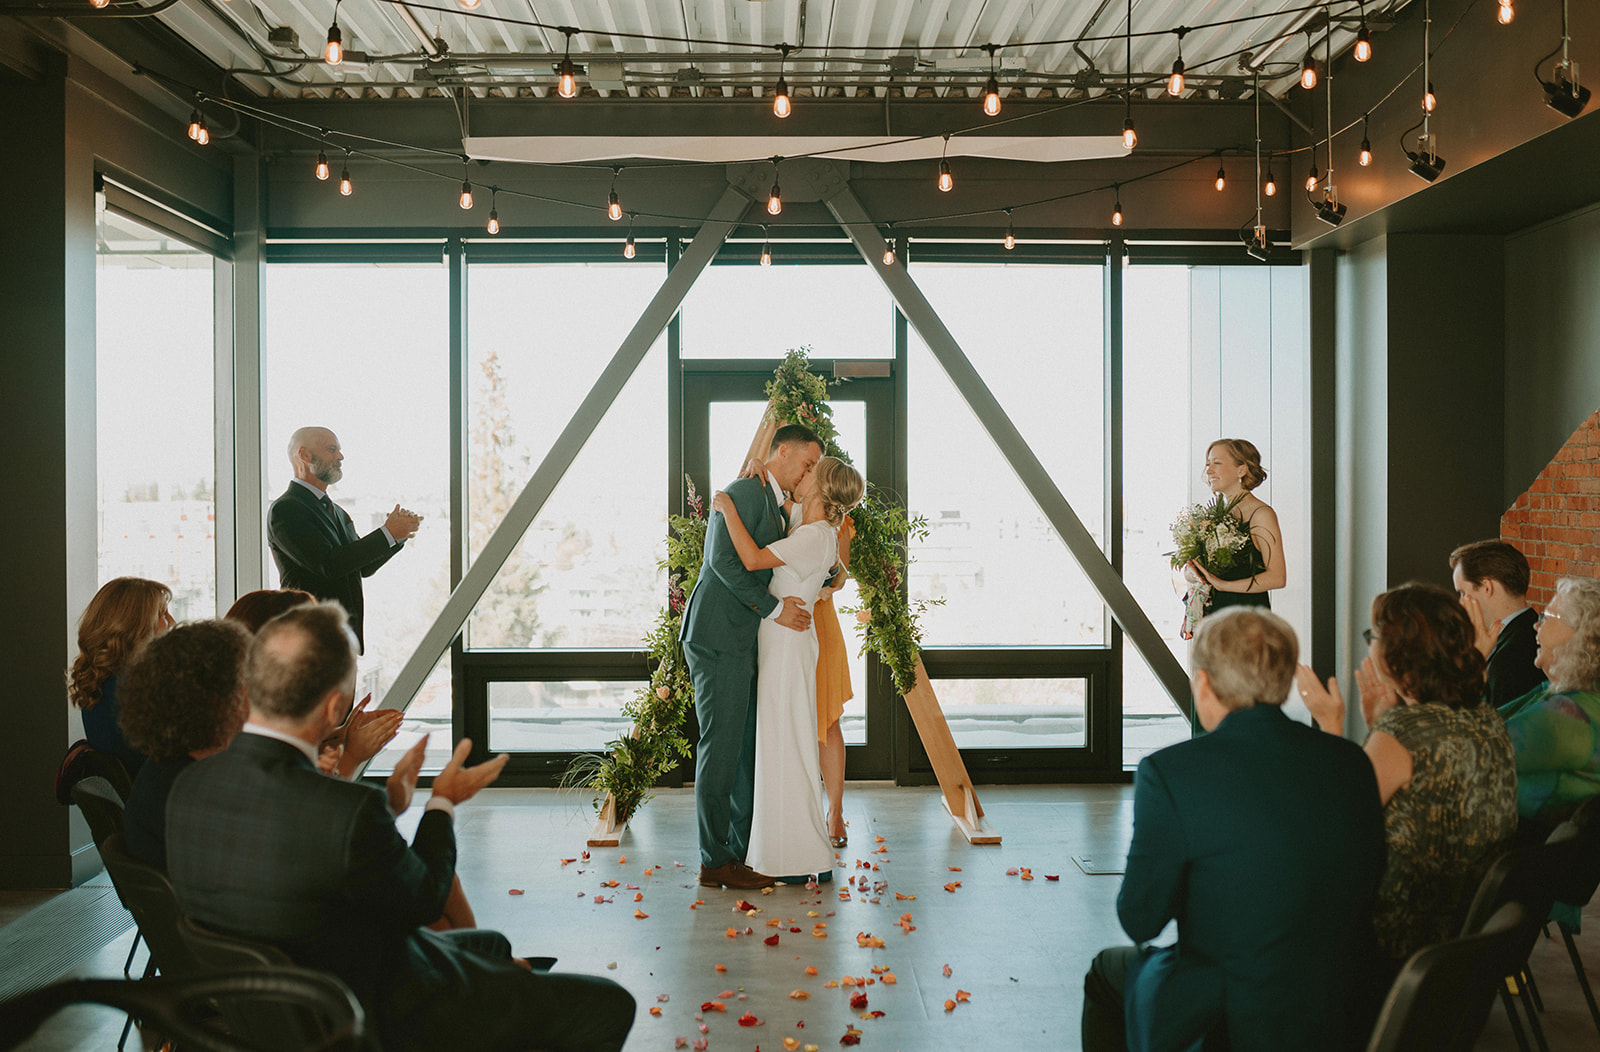 This Minimalist Micro-Wedding features a DIY Bouquet Made by the Bride Herself - first kiss, indoor wedding ceremony